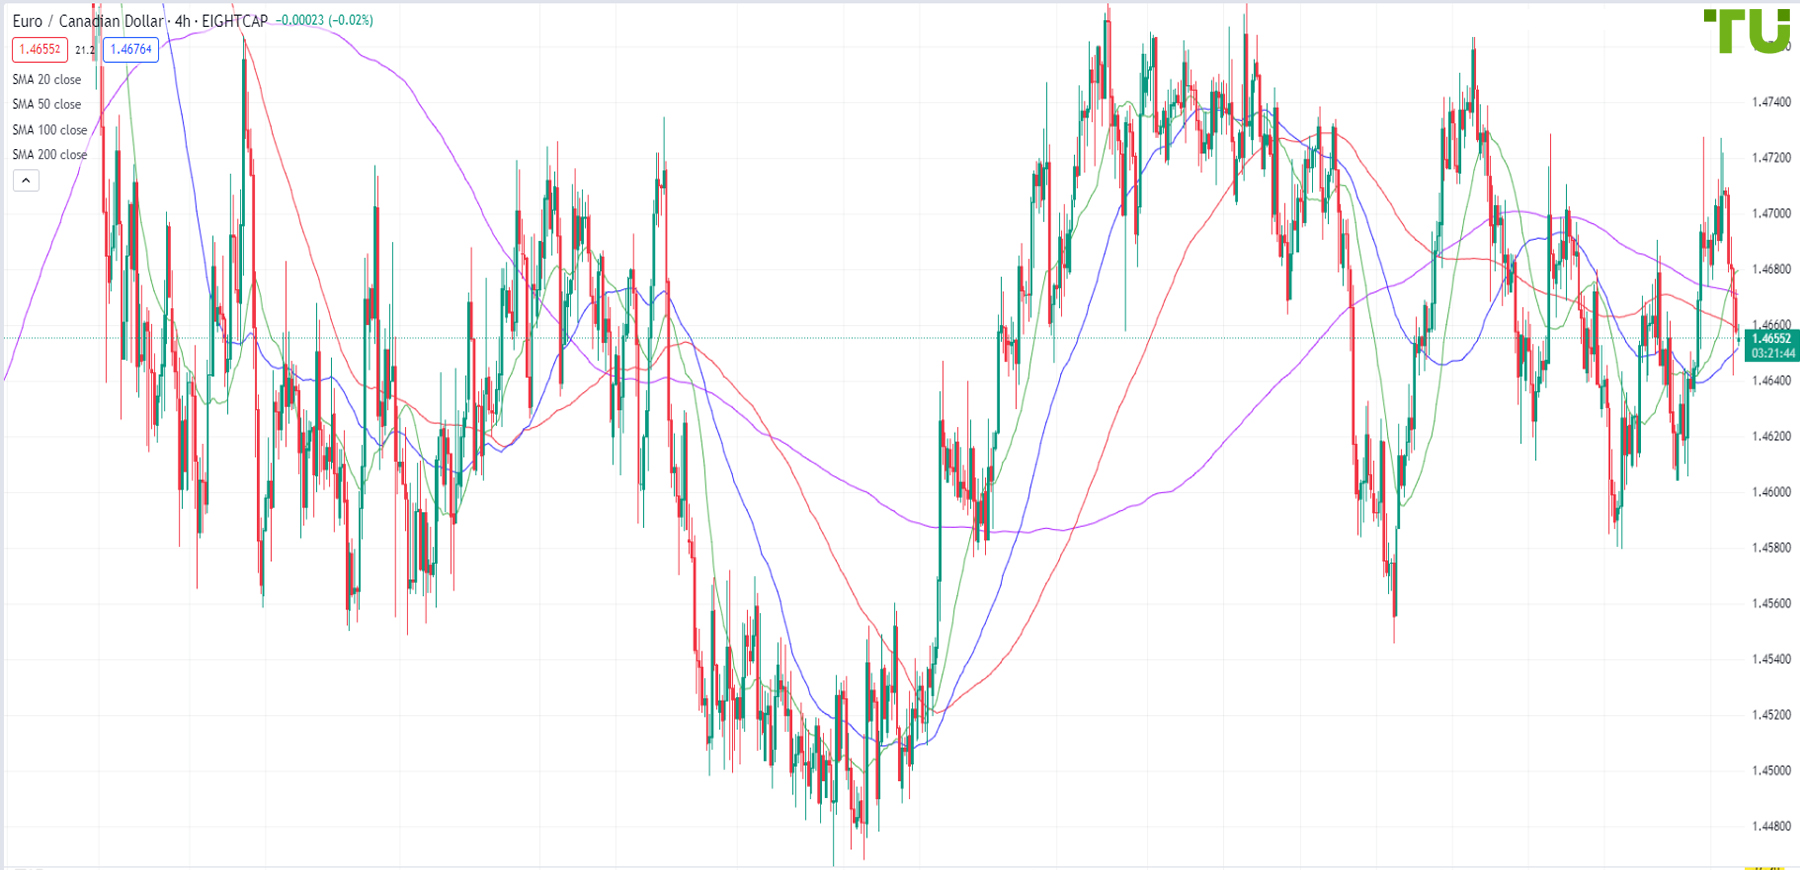 EUR/CAD retreated to 1.4645 support